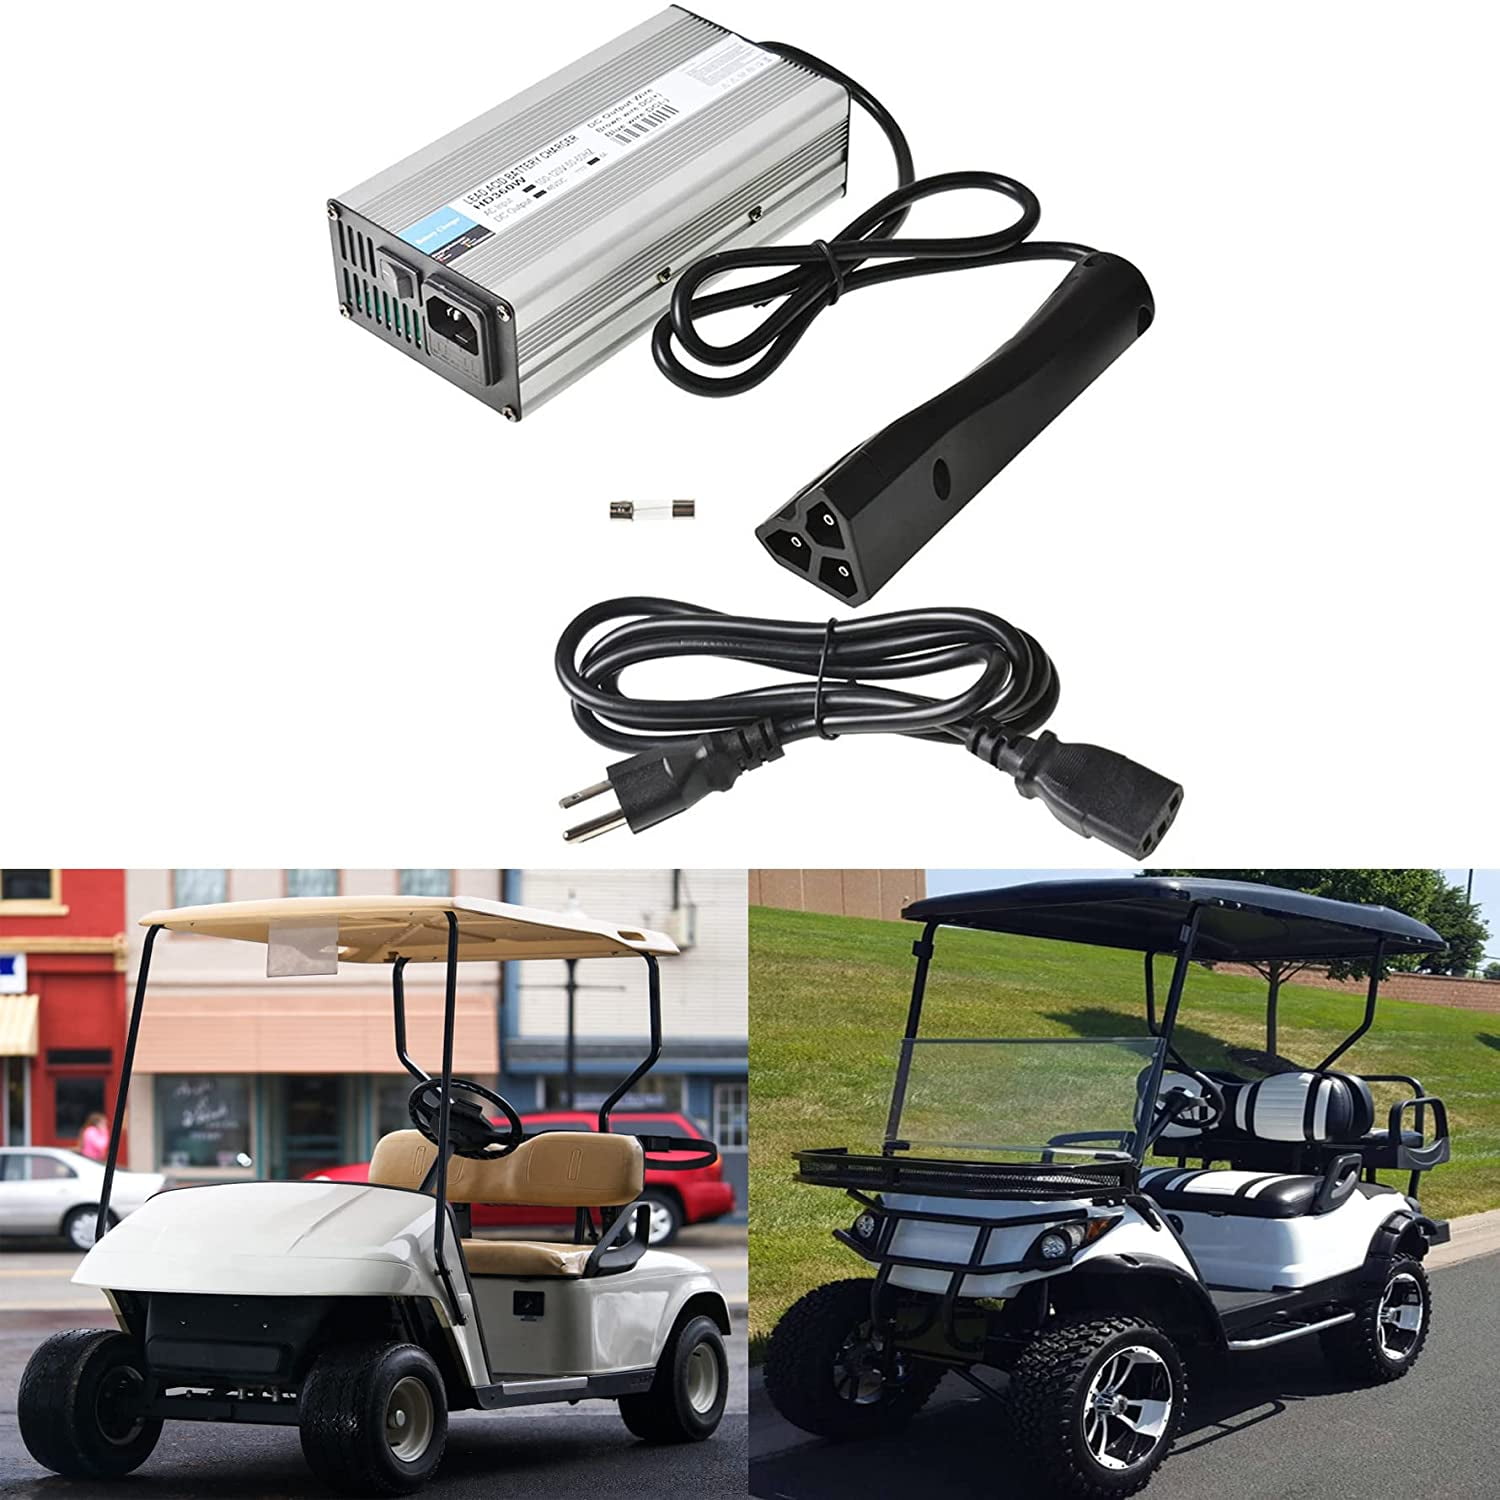 PET-U 48V 6A Golf Cart Battery Charger Replacement for EZGO TXT & RXV ...